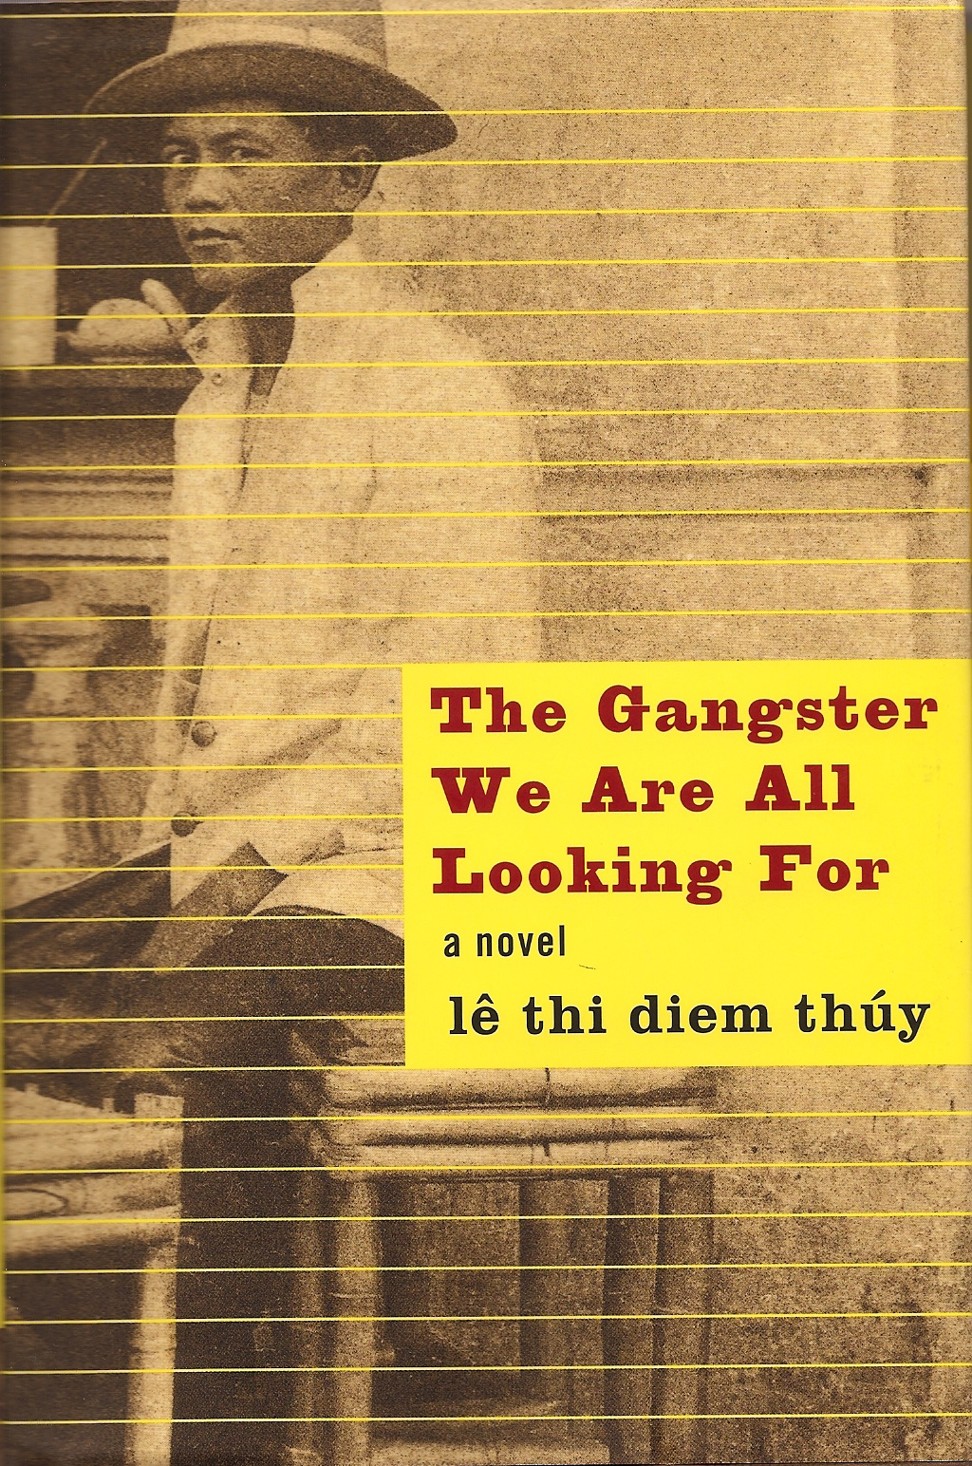 The cover of Le Thi Diem Thuy’s novel.